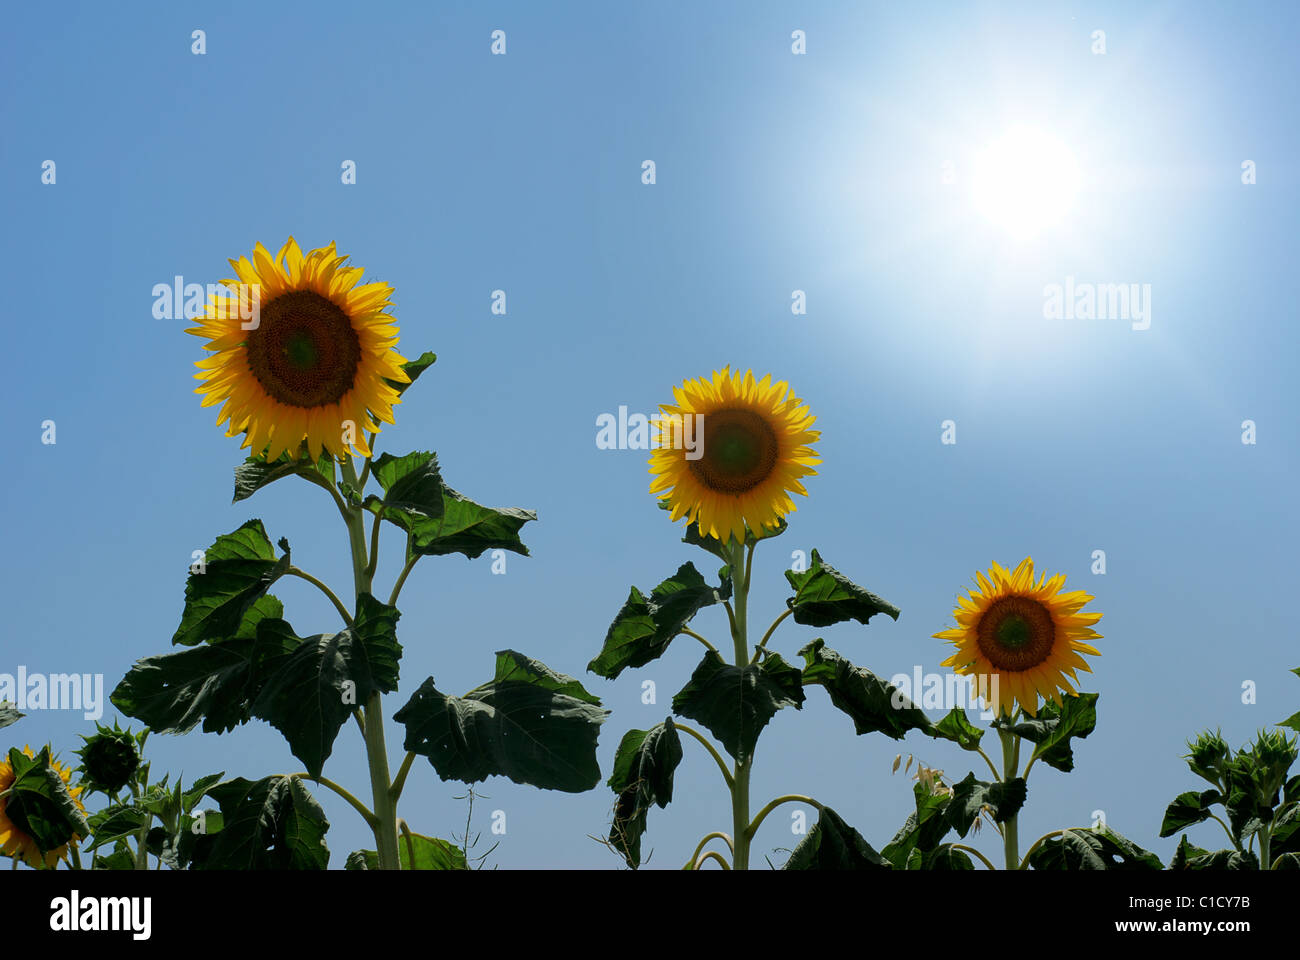 Bright sun over a line of sunflowers in a field Stock Photo